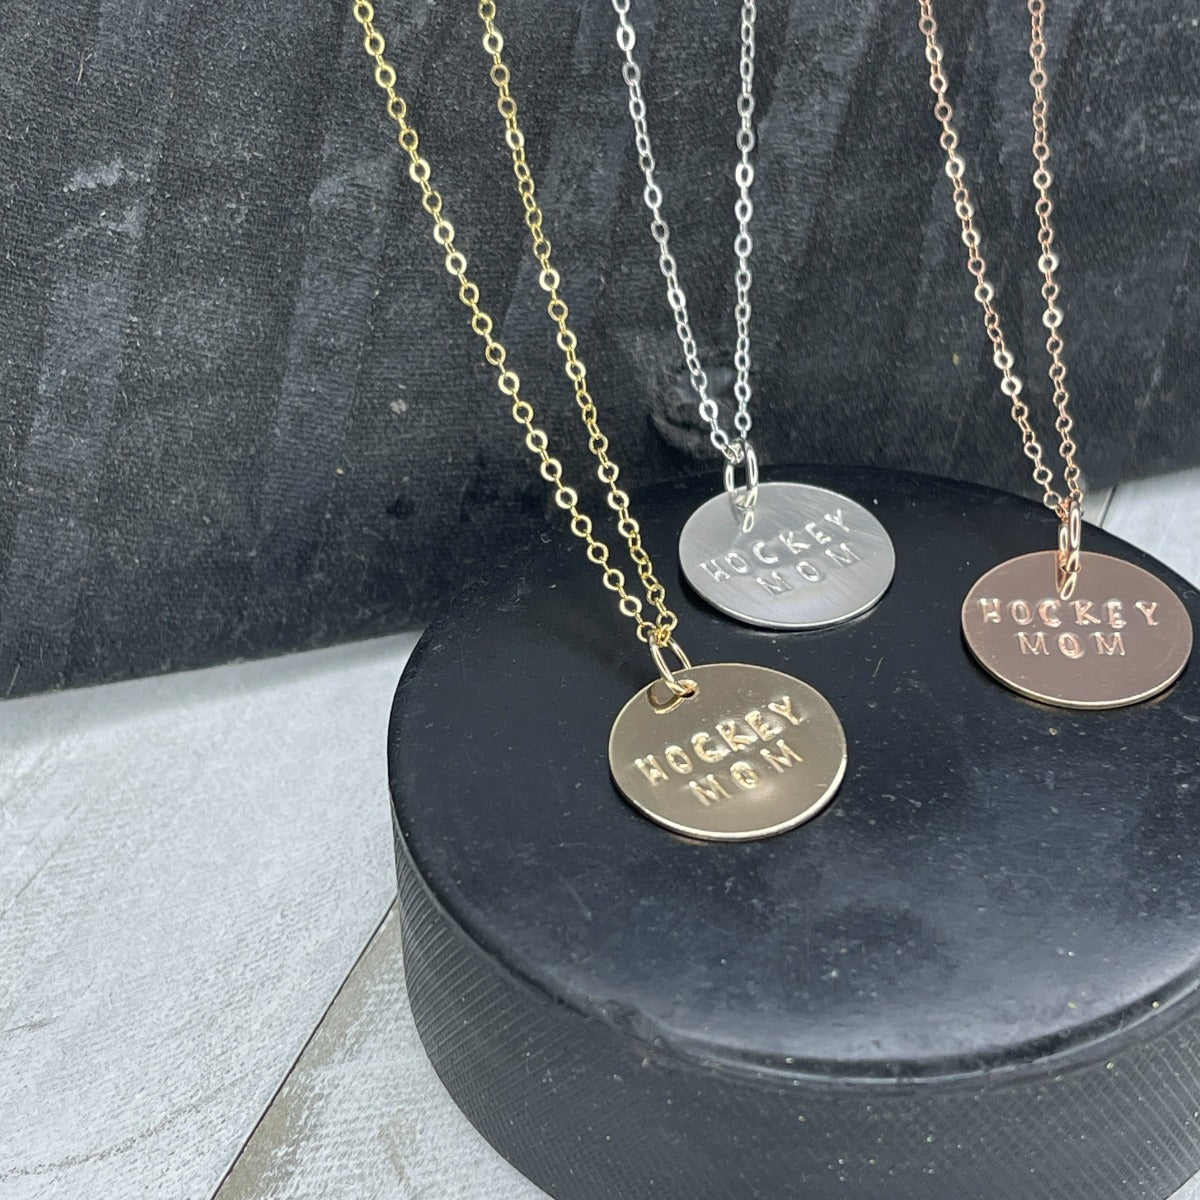 Hand stamped Hockey Mom Necklaces handmade by Marni LuHu in 14K Gold and Rose Gold Fill and sterling Silver